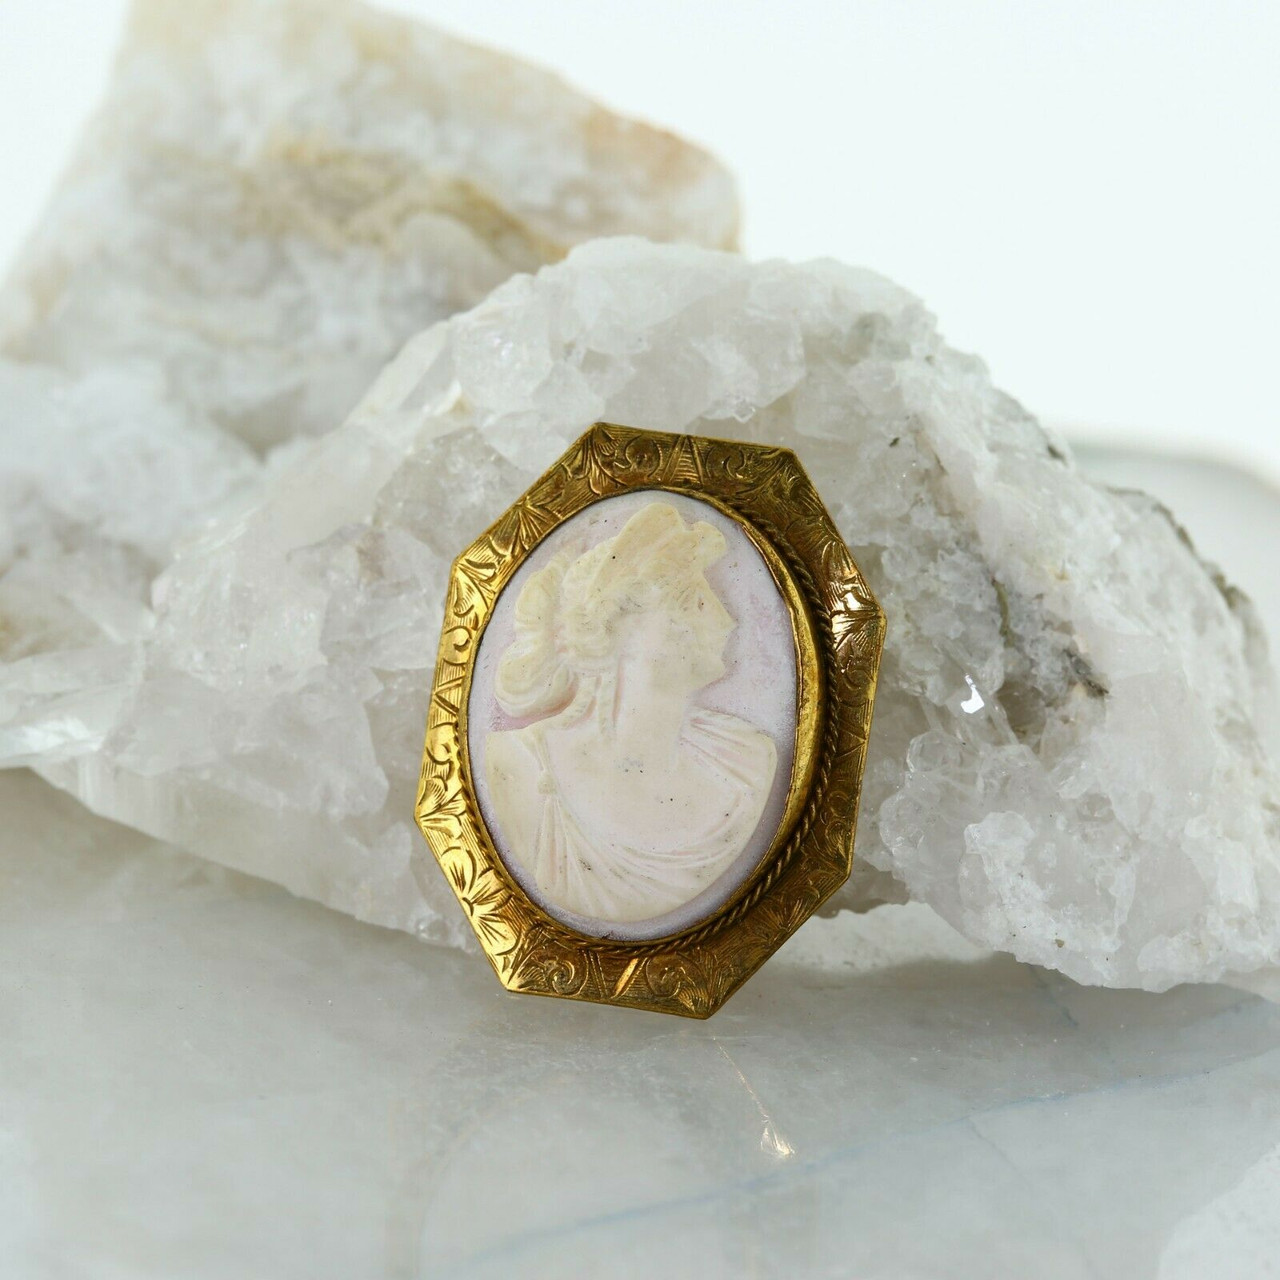 Antique Gold Filled Shell Cameo Brooch Circa 1890